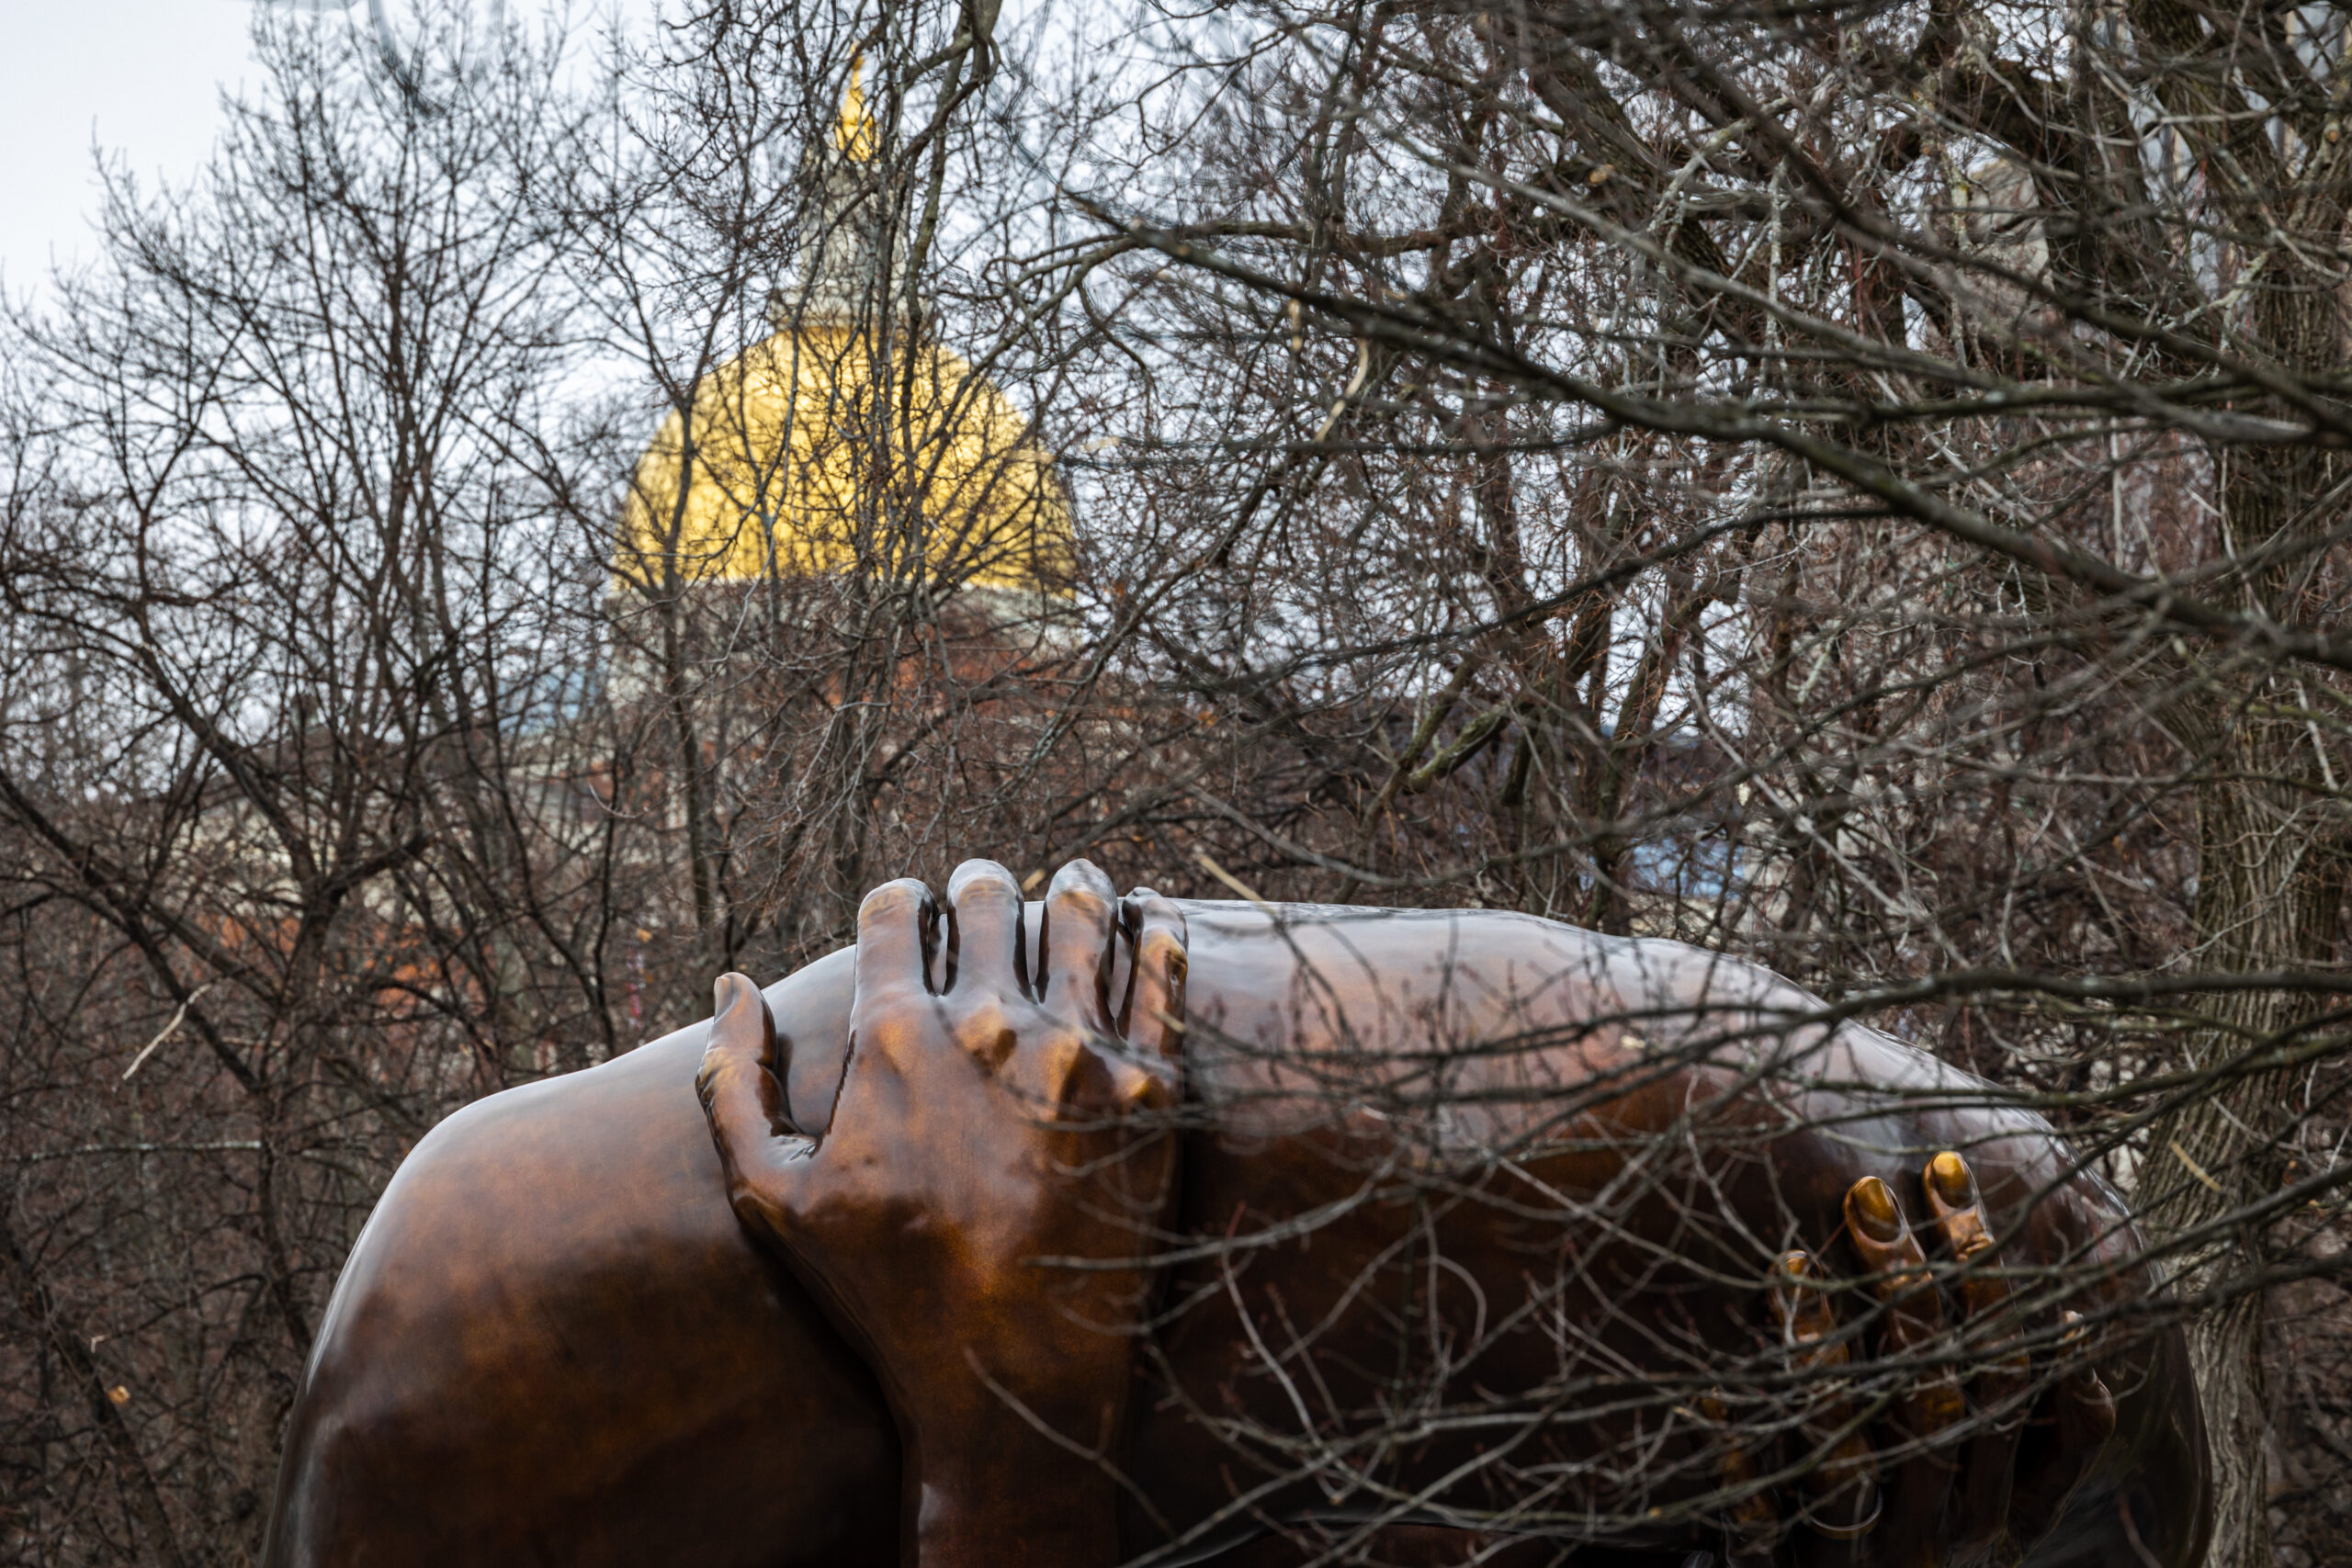 The golden dome of the Massachusetts State House is seen in the background of The Embrace